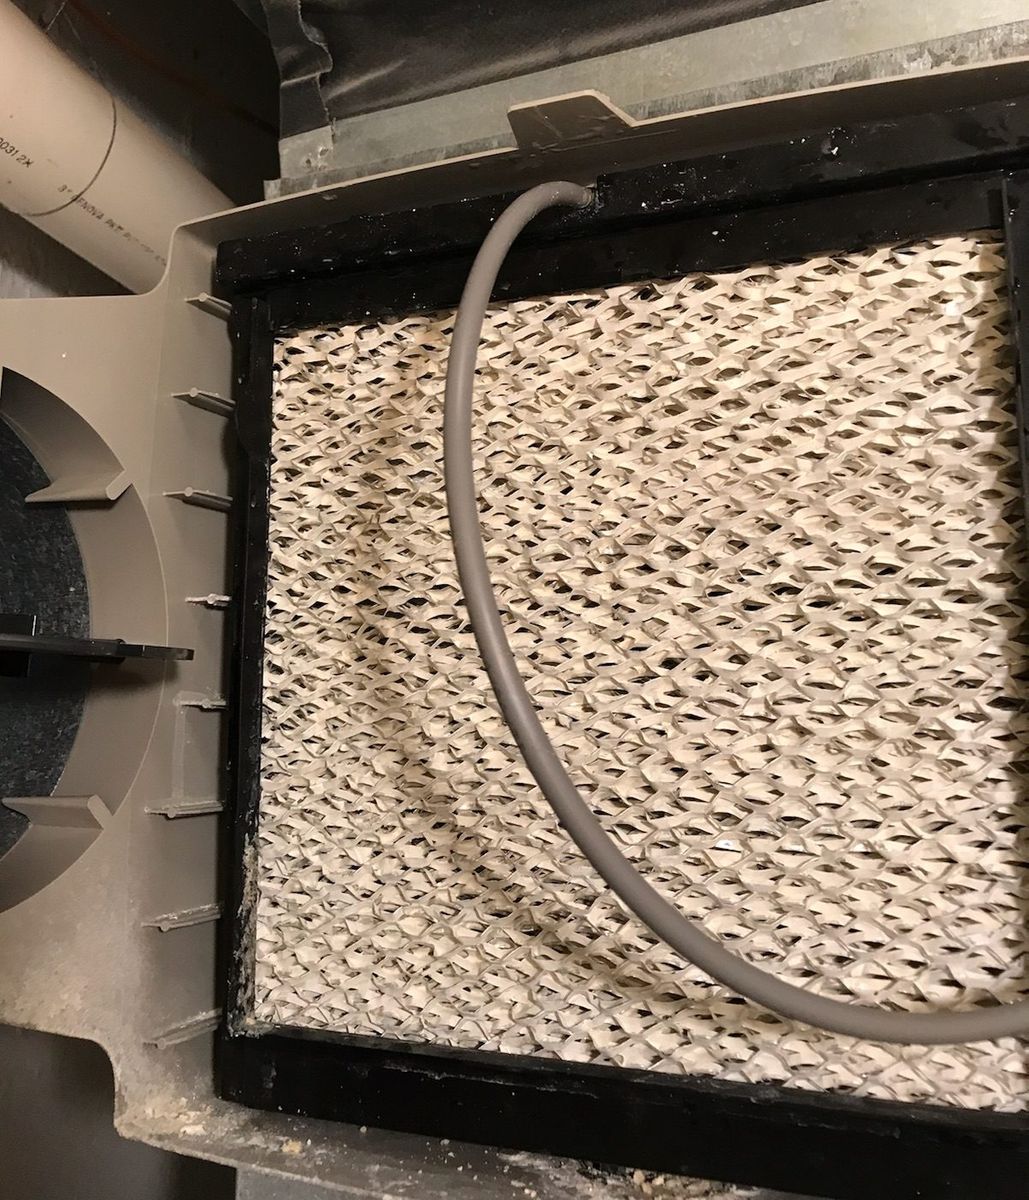 Large, clean filter installed in an HVAC system after routine maintenance from Northfield Heating & Air in Northbrook, IL